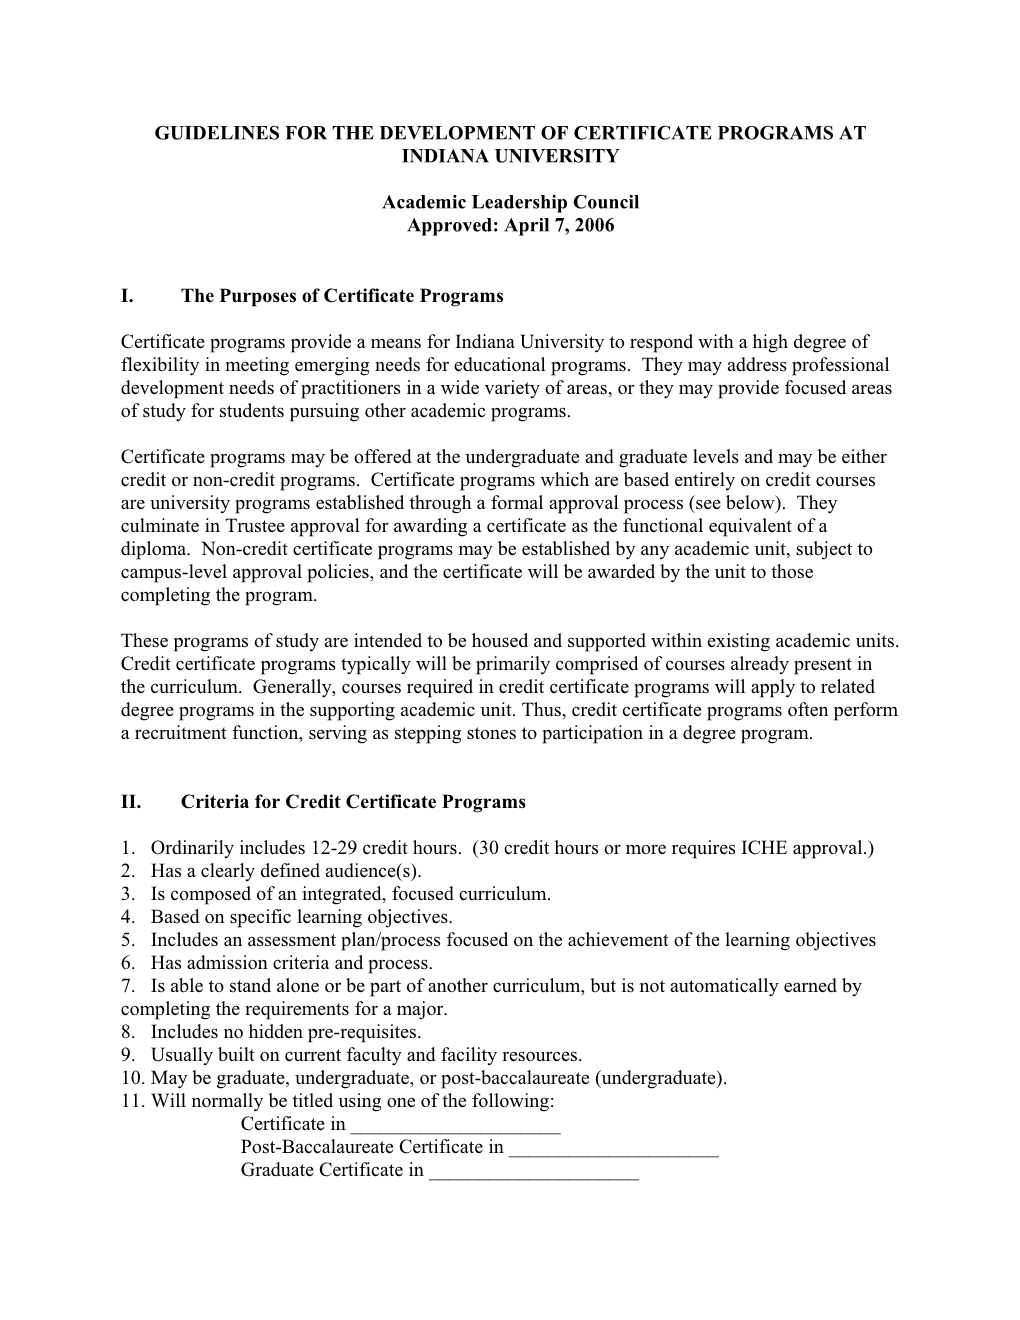 Guidelines for the Development of Certificate Programs at Indiana University